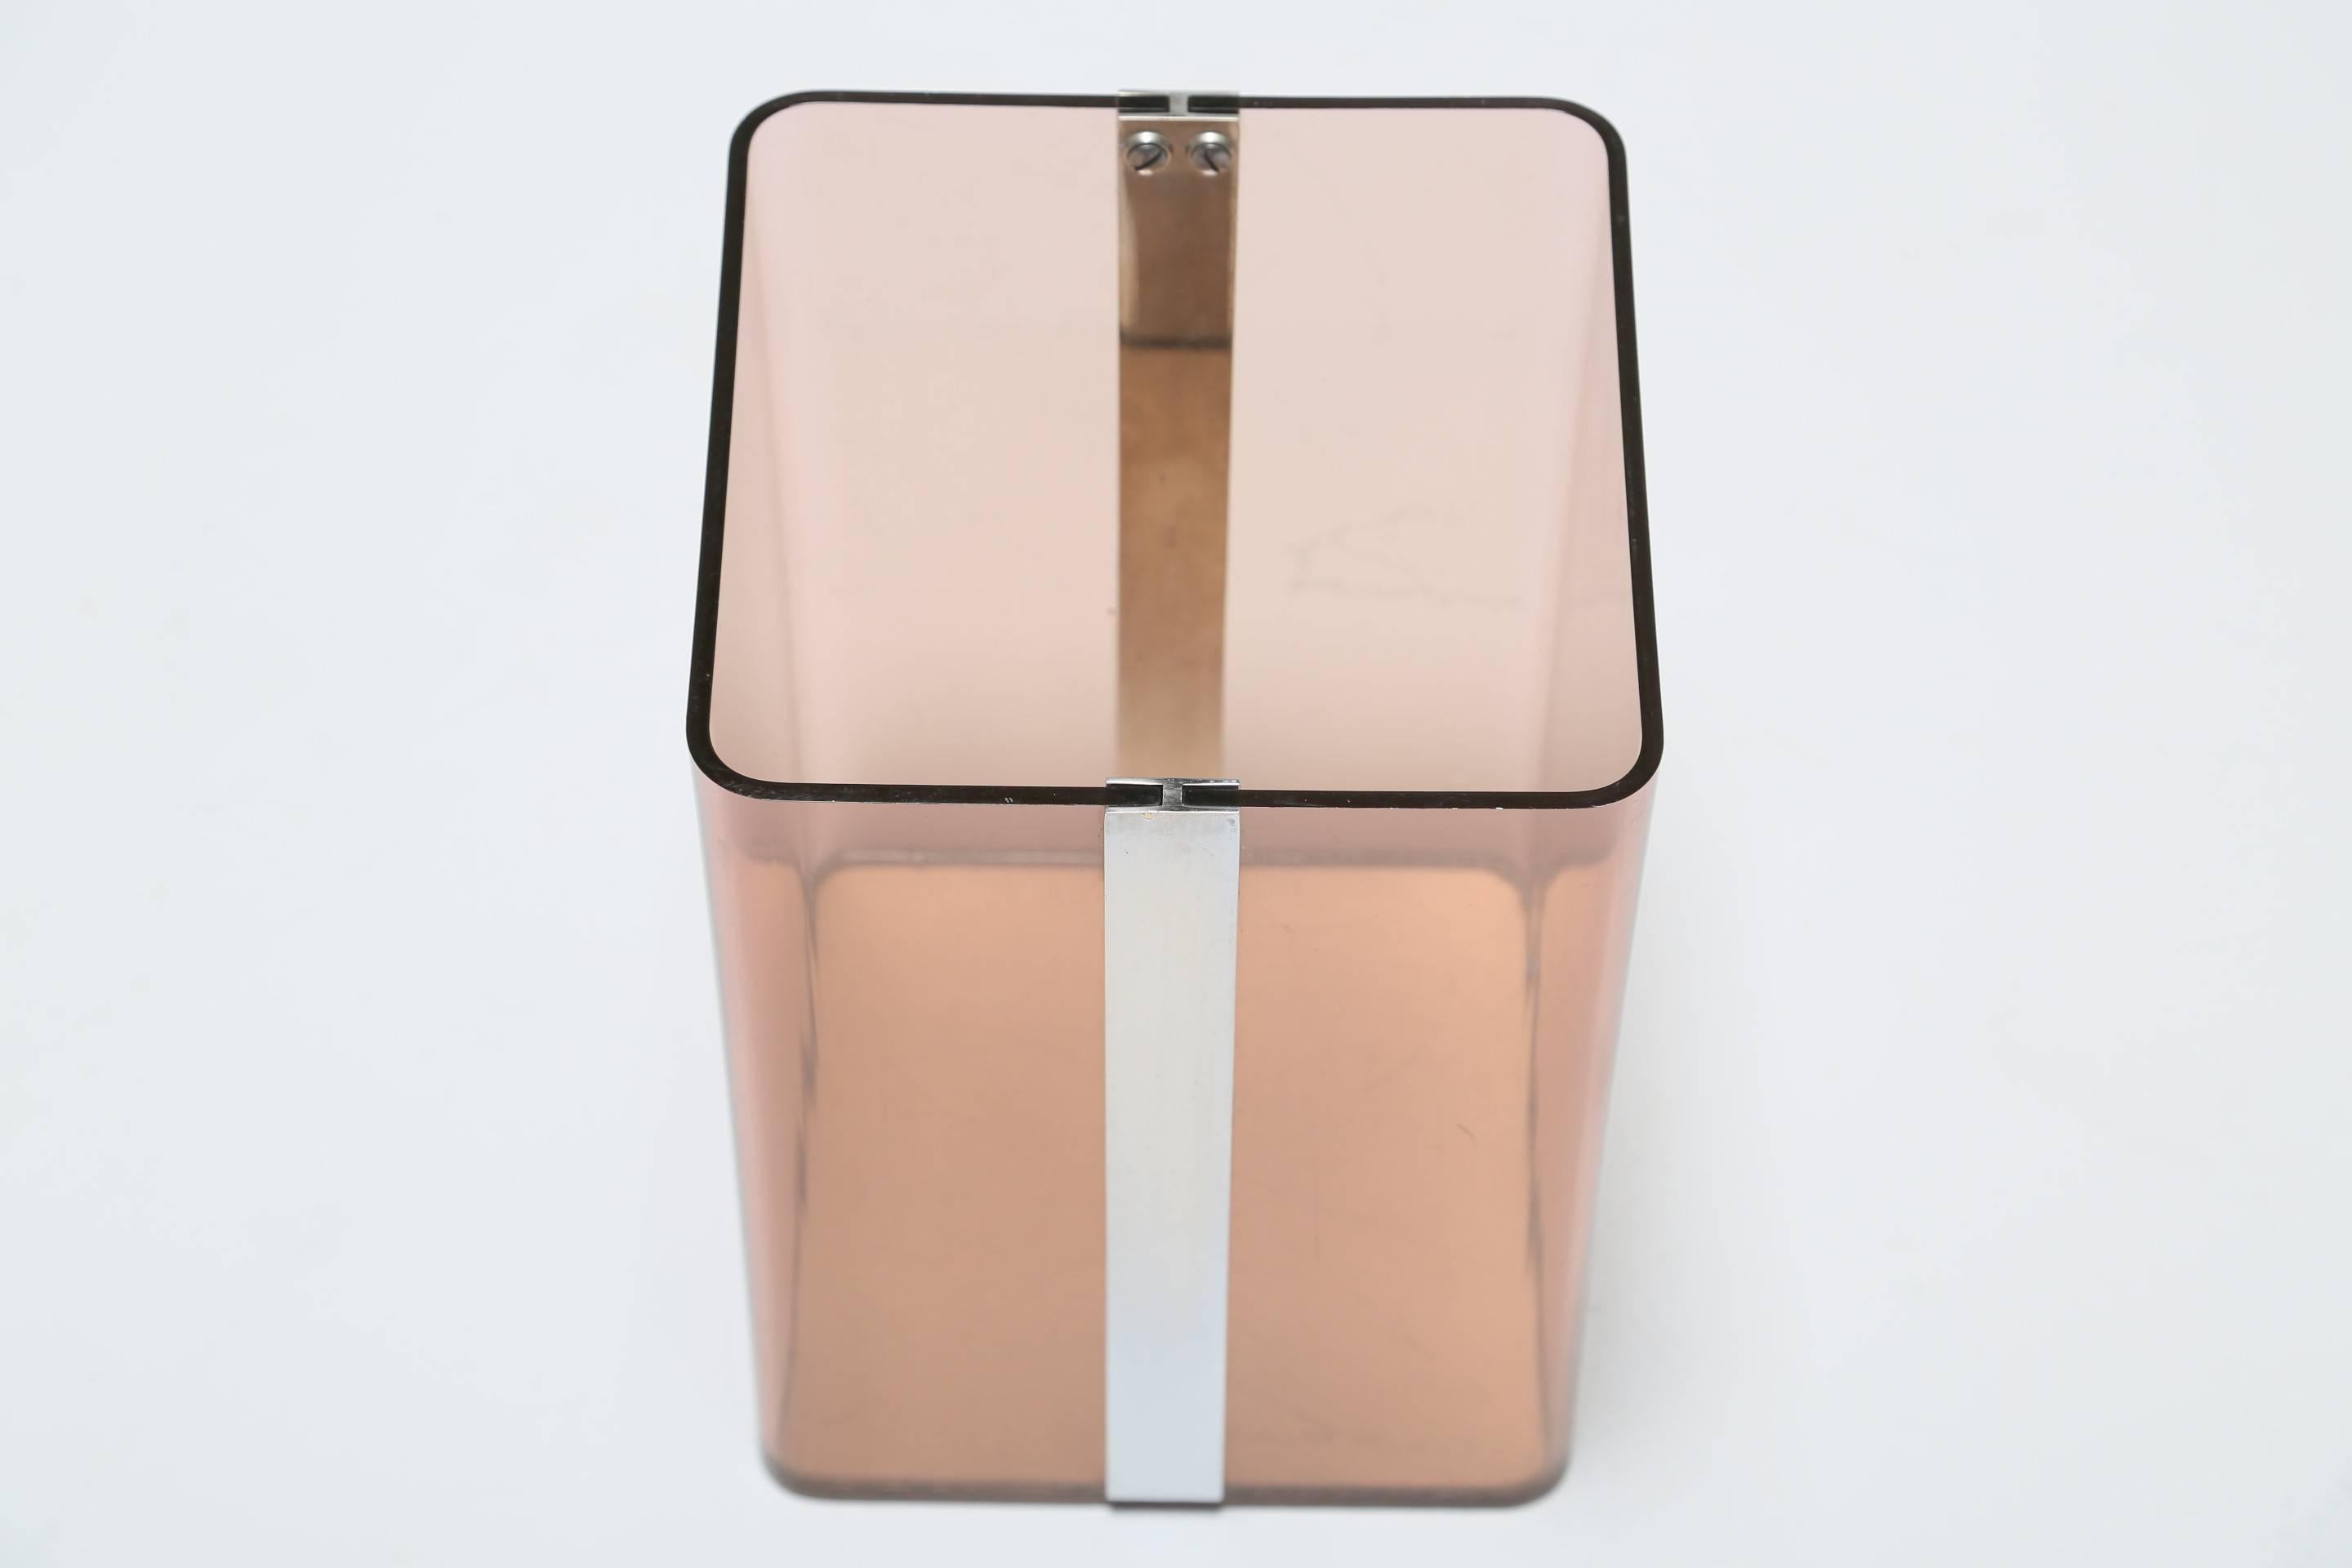 Lucite and chrome Mid-Century waste paper bin. Good quality and a good looking piece. Worldwide shipping included.